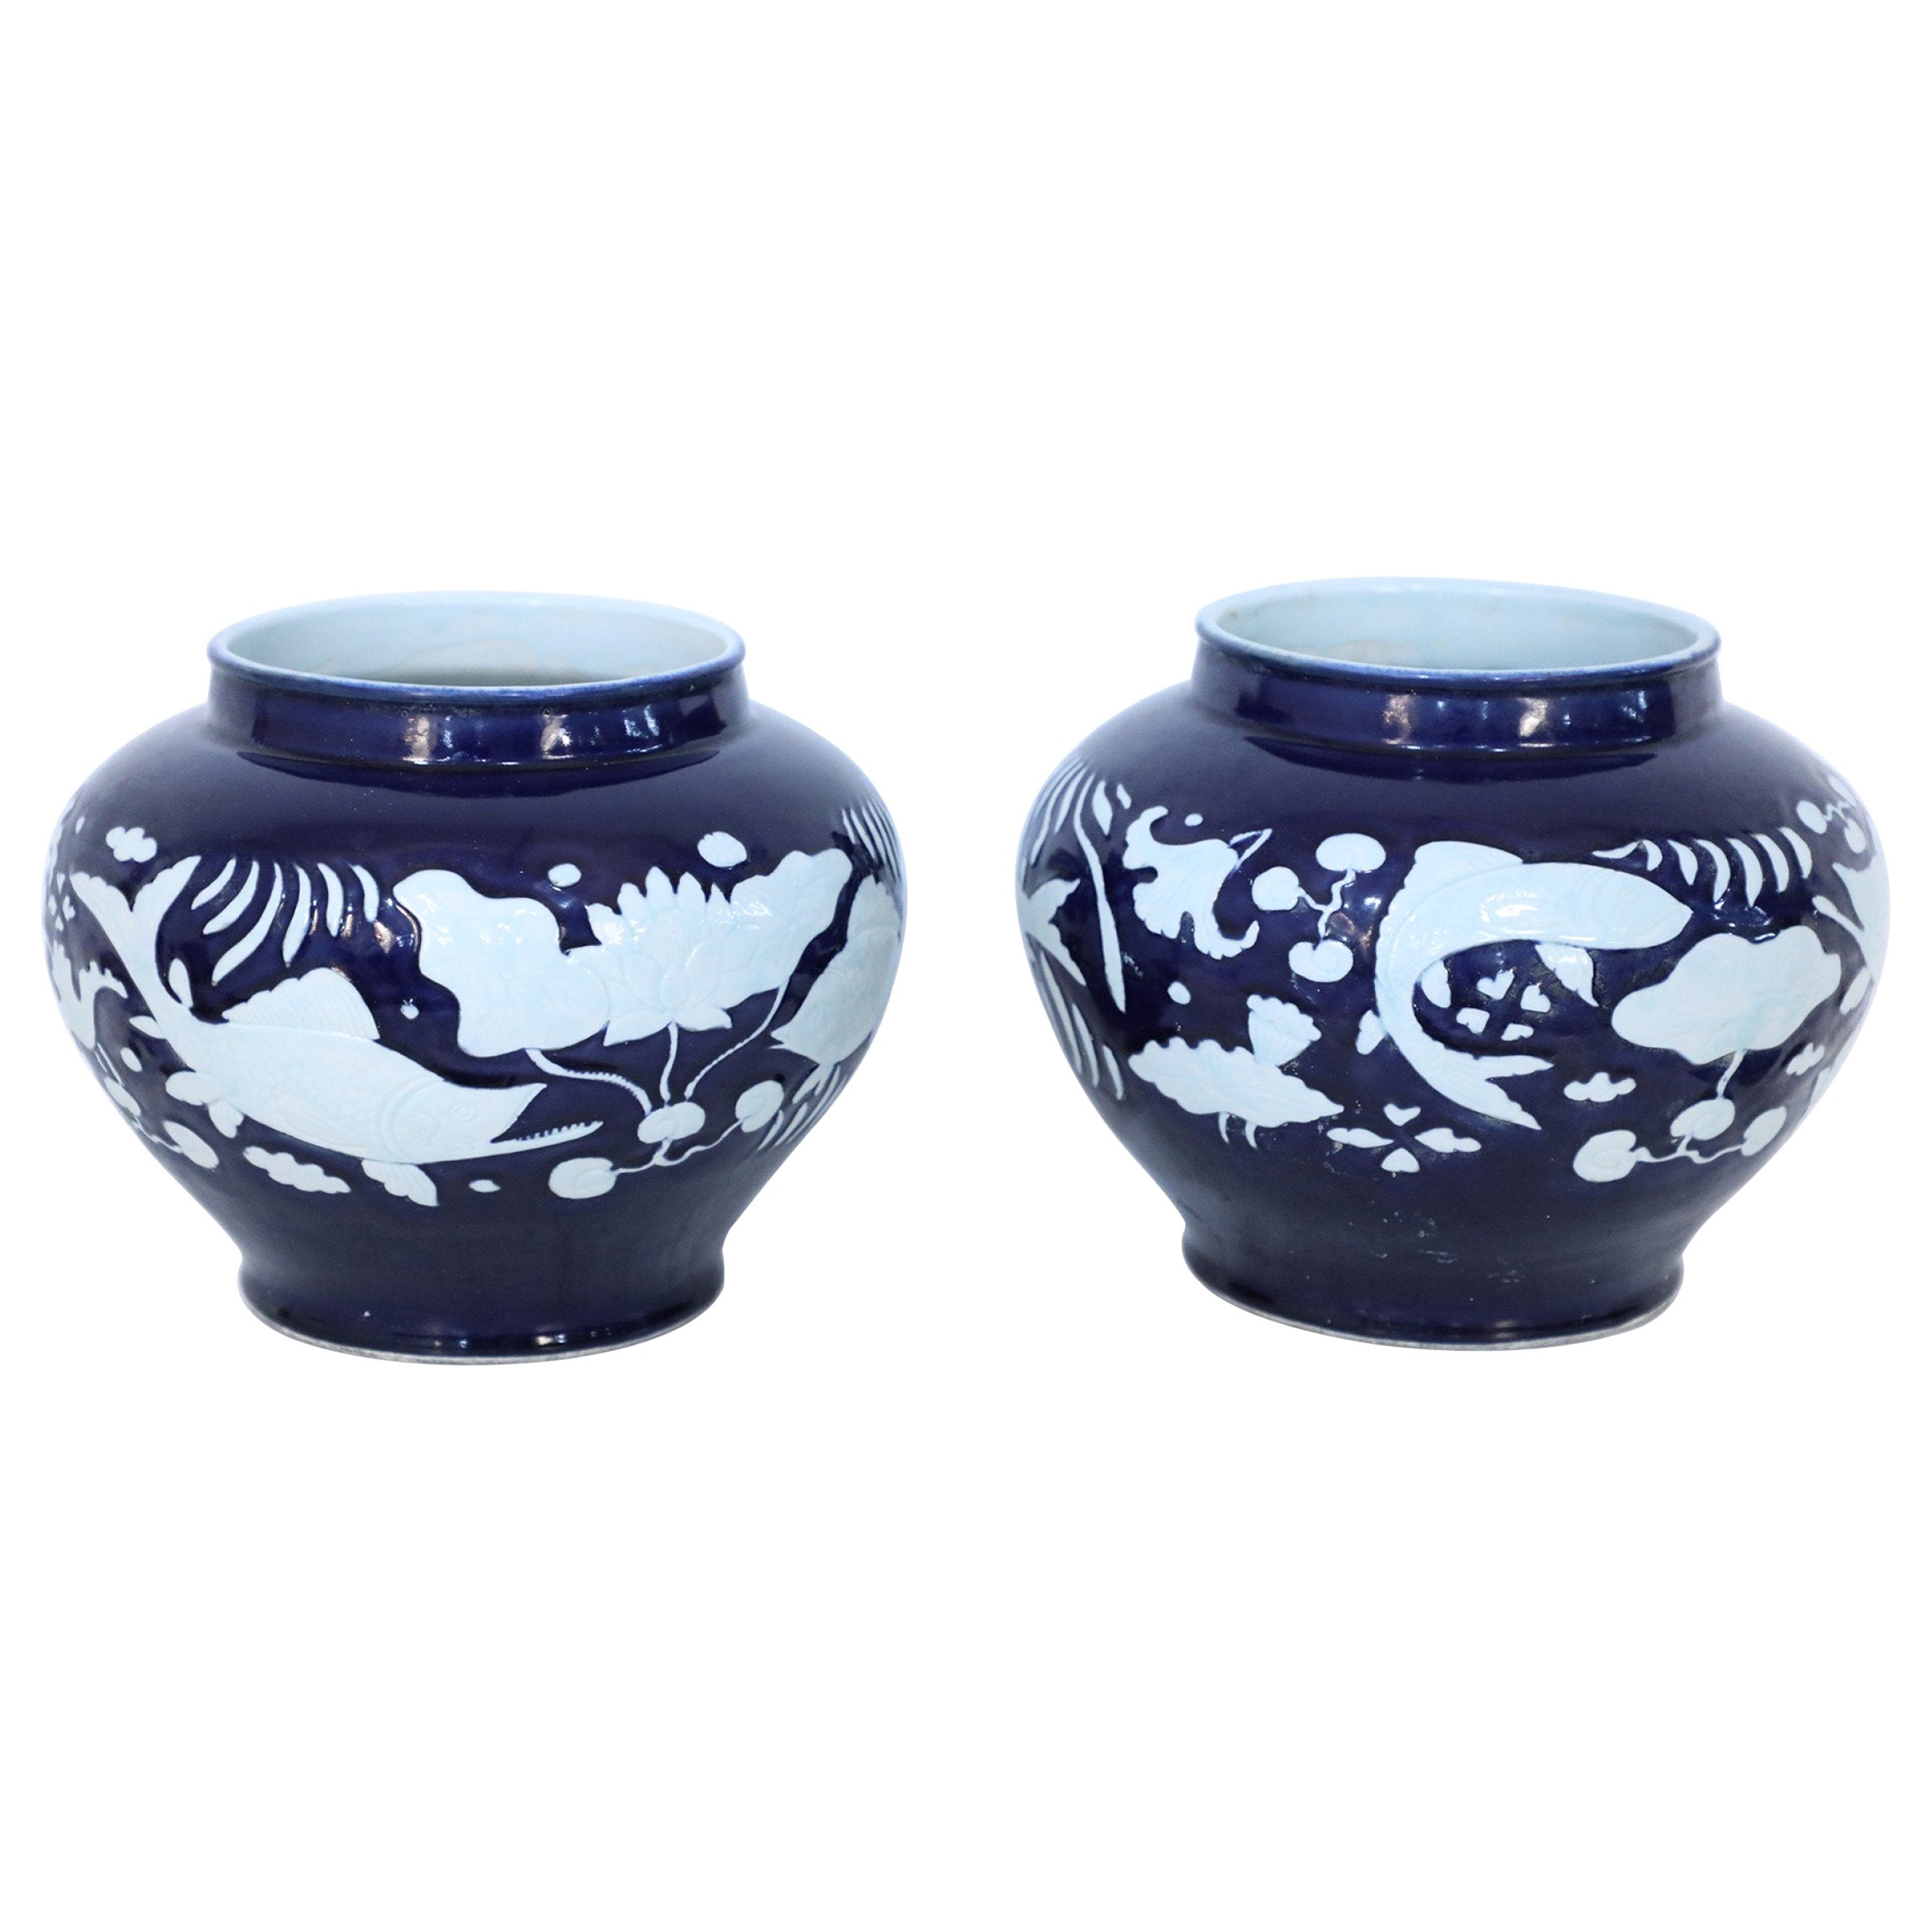 Pair of Chinese Blue and White Underwater Motif Porcelain Pots